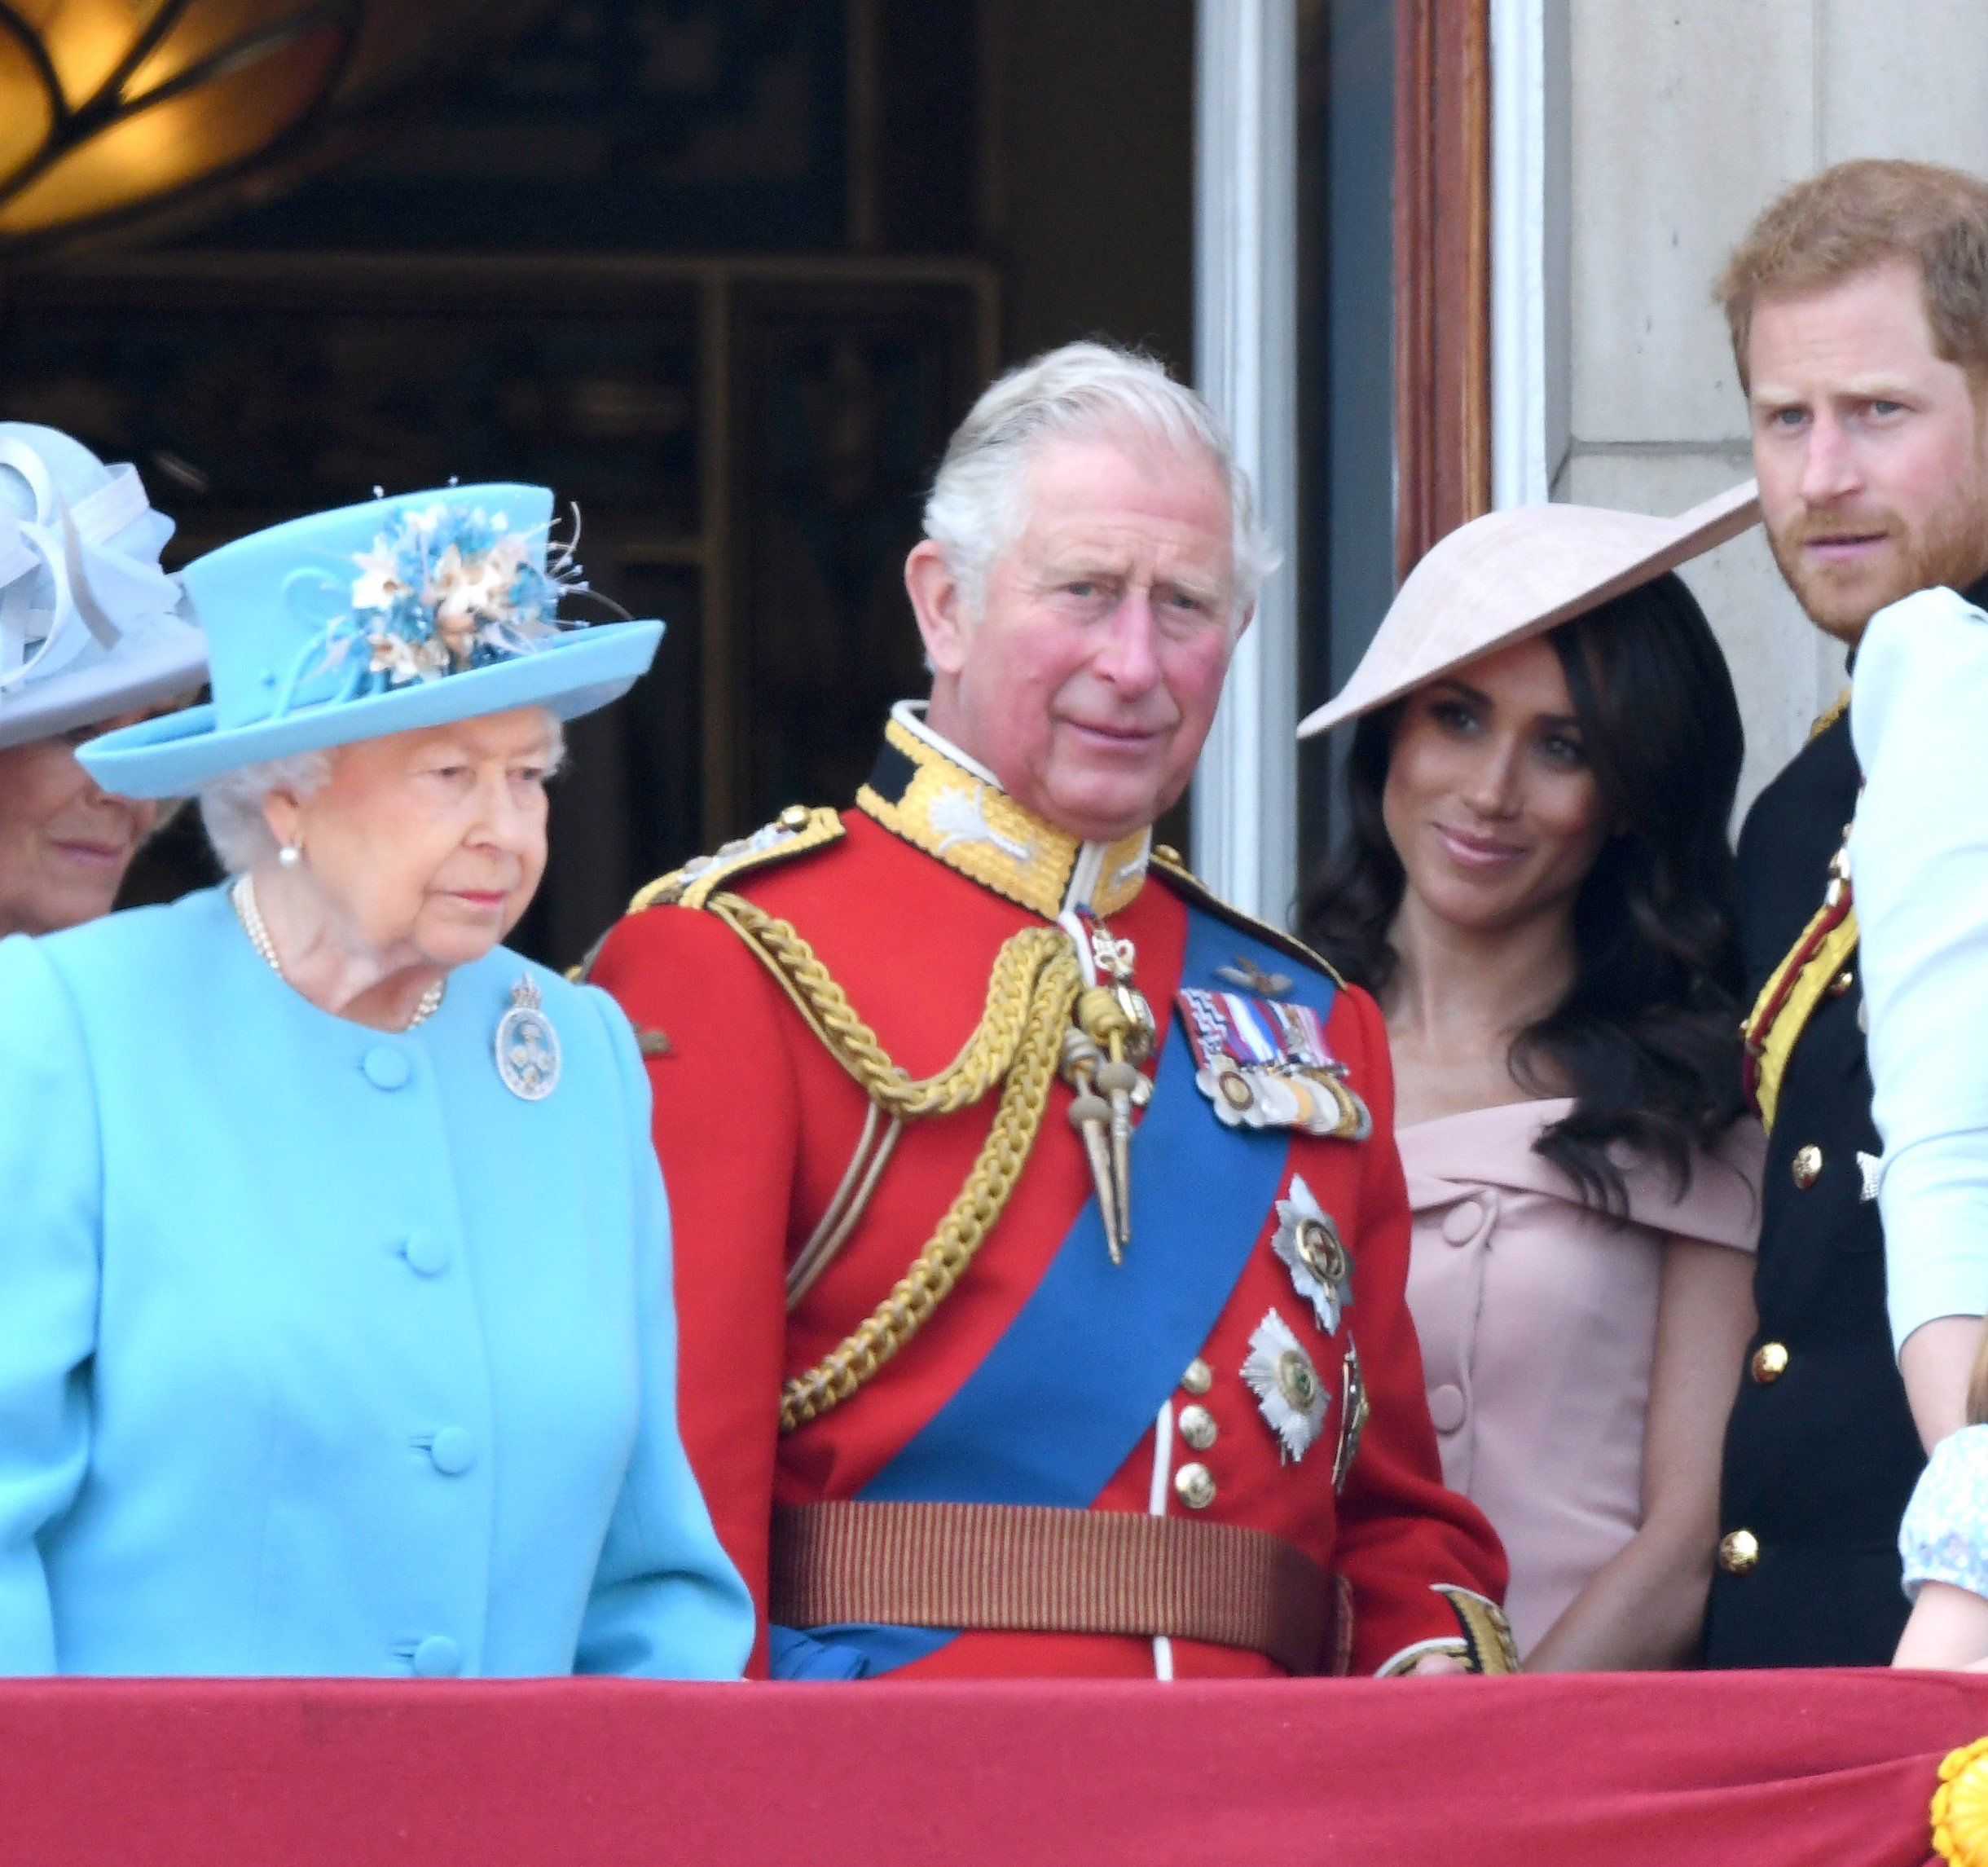 Queen Elizabeth II, then-Prince Charles, Meghan Markle, and Prince Harry on the balcony of Buckingham Palace during Trooping The Colour 2018